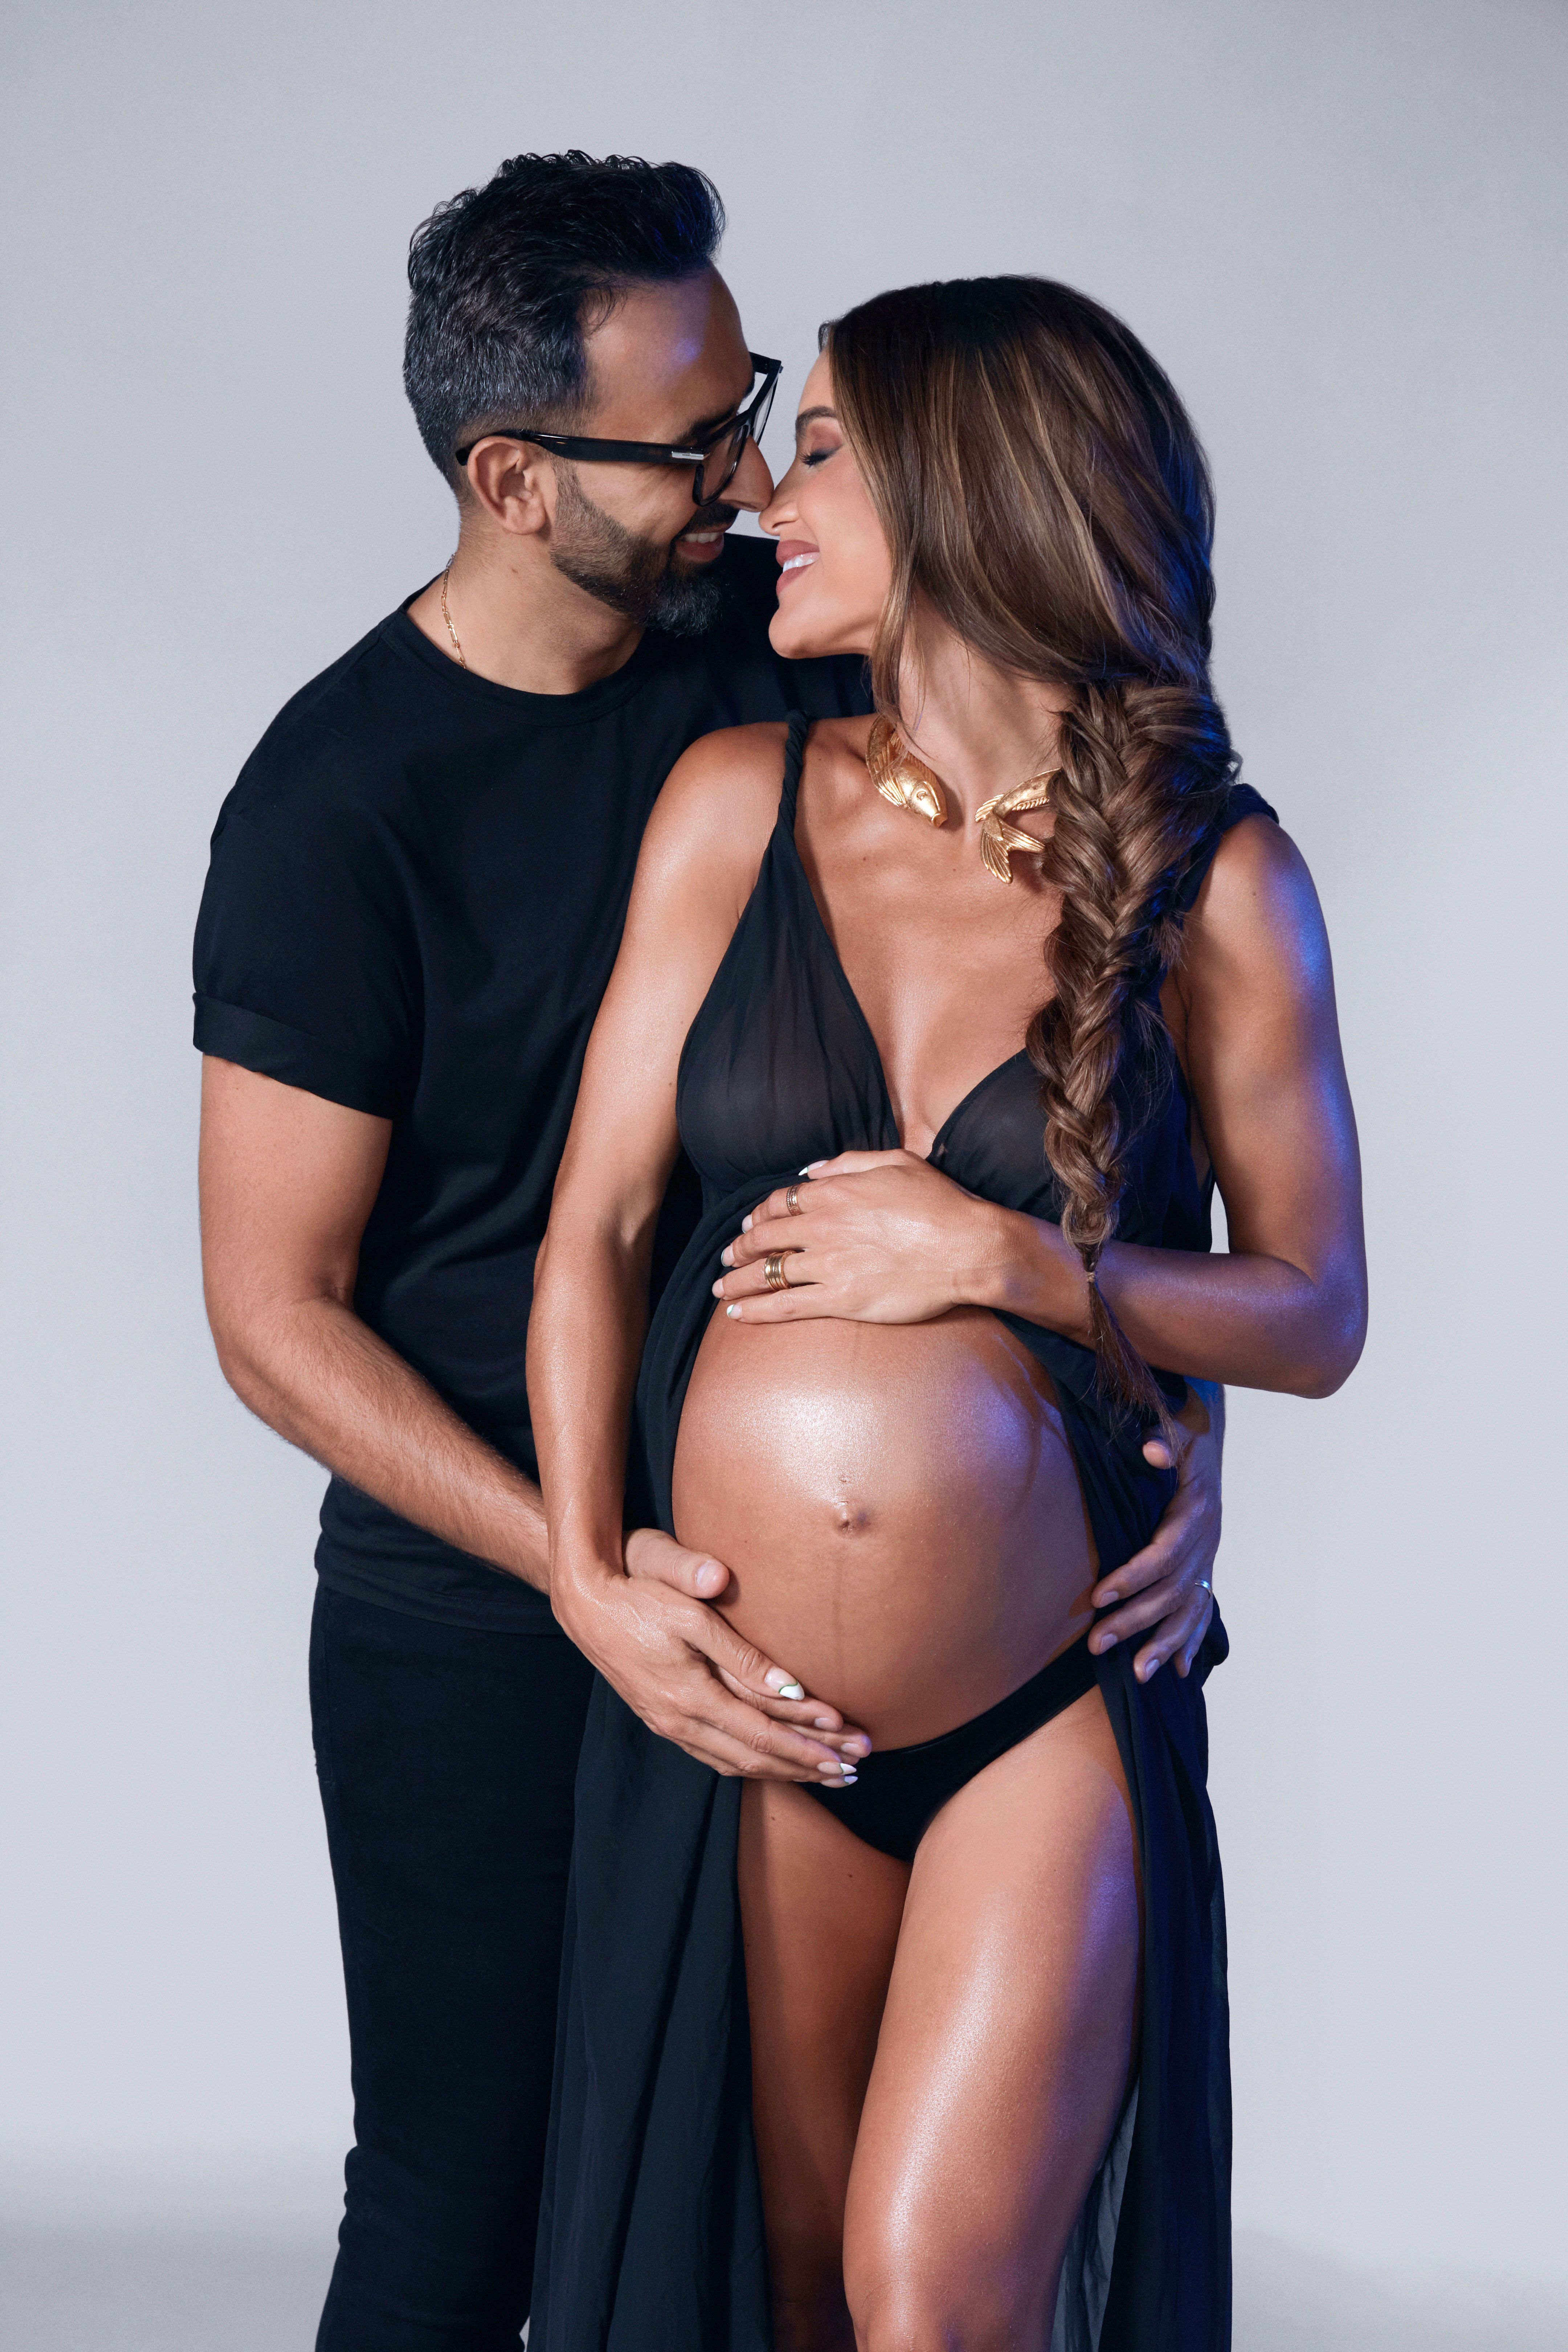 Camila Coelho Shares Her 9-Month Maternity Shoot and Discusses